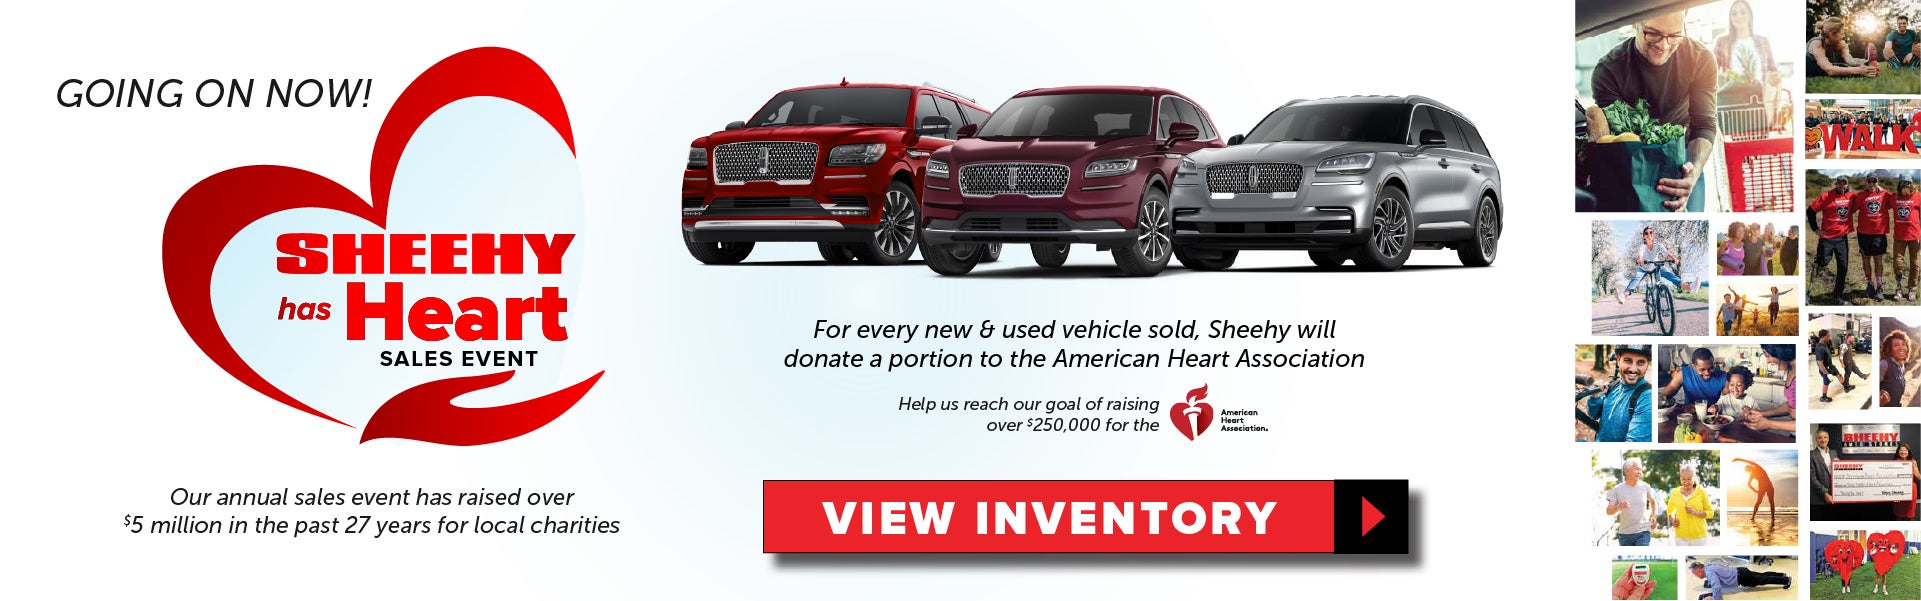 Sheehy Has Heart Sales Event